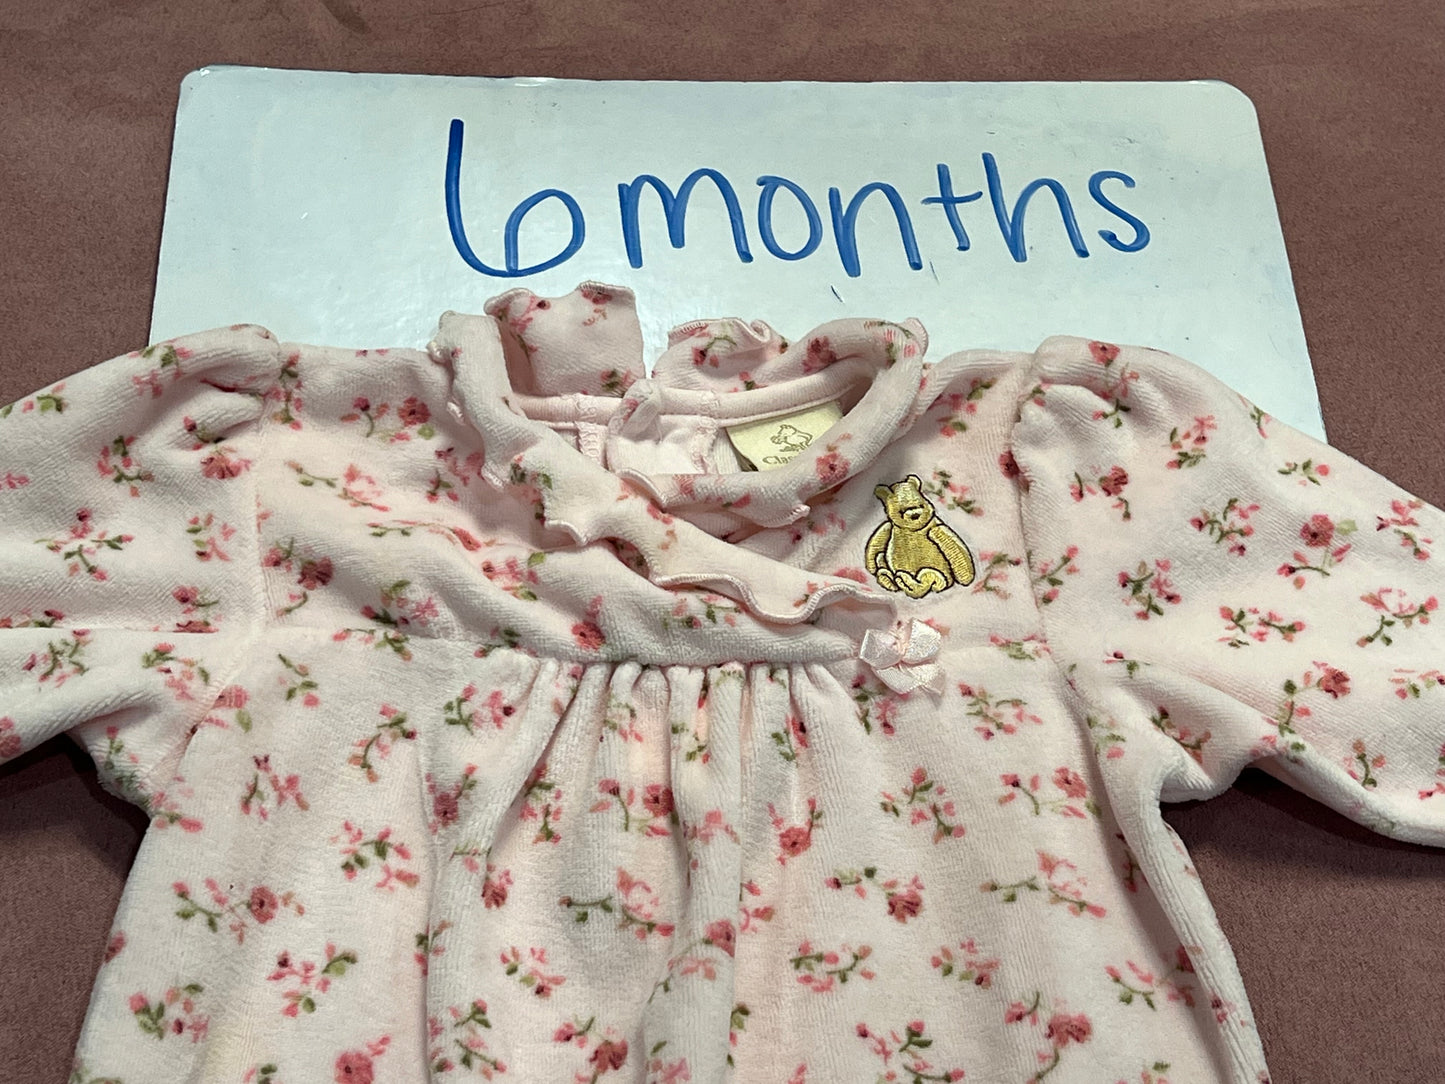 6 month girls vintage Winnie the Pooh velour outfit